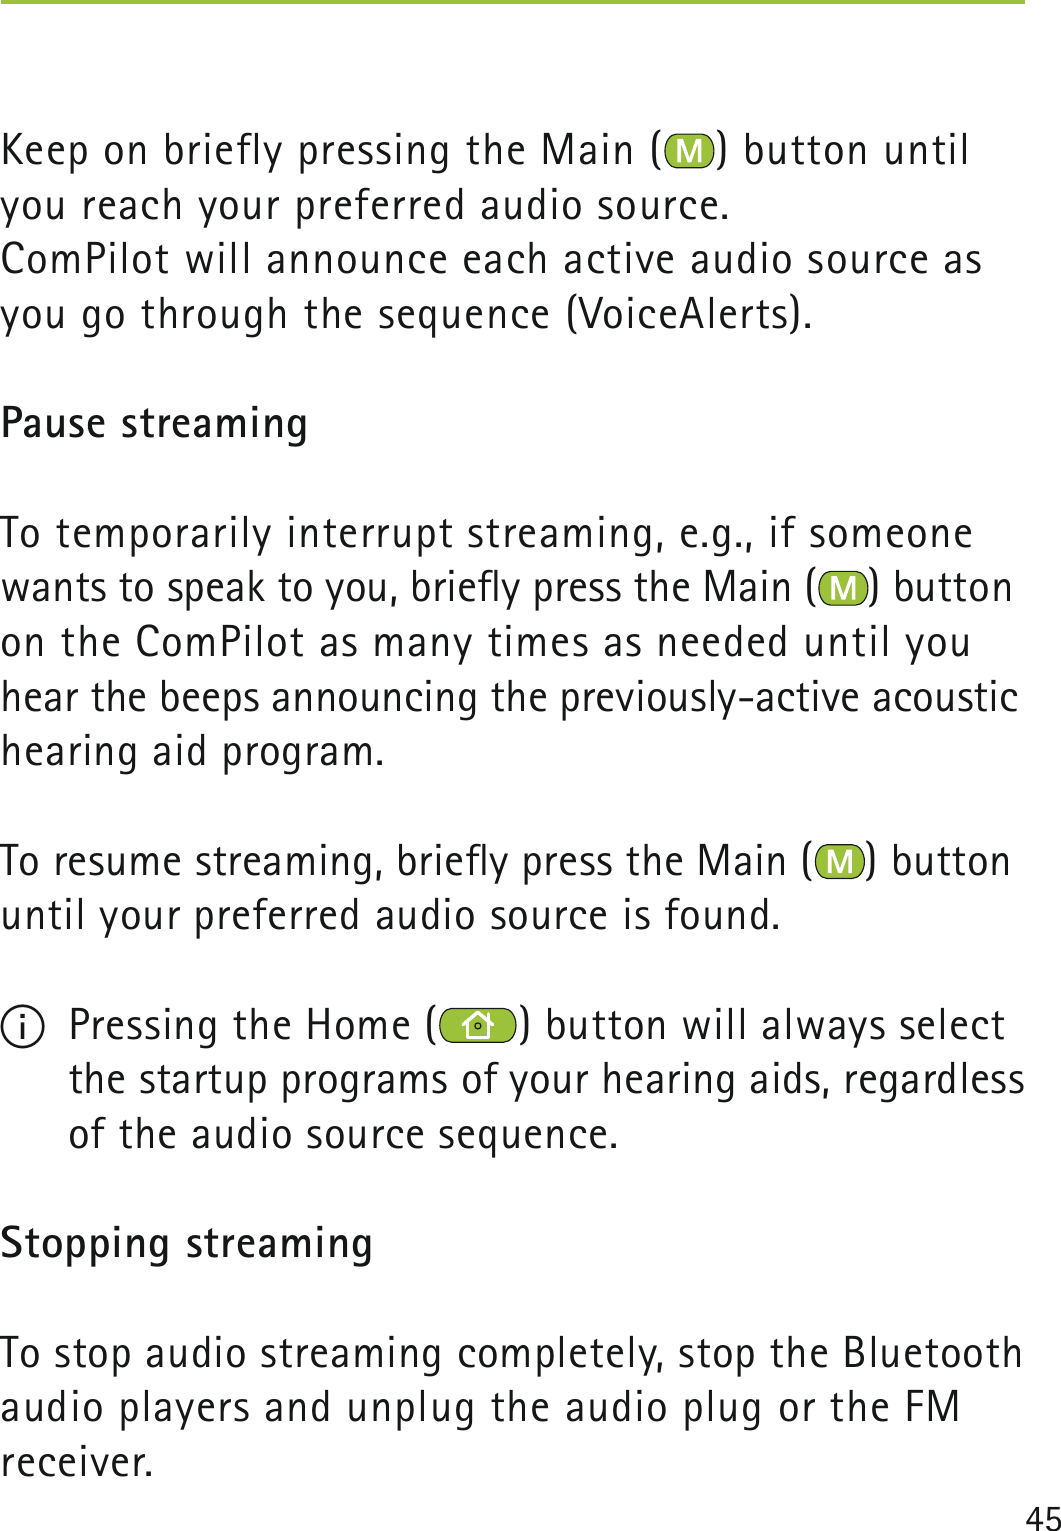 45Keep on briefly pressing the Main ( ) button until you reach your preferred audio source.ComPilot will announce each active audio source as you go through the sequence (VoiceAlerts).Pause streamingTo temporarily interrupt streaming, e.g., if someone wants to speak to you, brieﬂy press the Main ( ) button on the ComPilot as many times as needed until you hear the beeps announcing the previously-active acoustic hearing aid program.To resume streaming, brieﬂy press the Main ( ) button until your preferred audio source is found.I  Pressing the Home ( ) button will always select the startup programs of your hearing aids, regardless of the audio source sequence.Stopping streamingTo stop audio streaming completely, stop the Bluetooth audio players and unplug the audio plug or the FM receiver.  